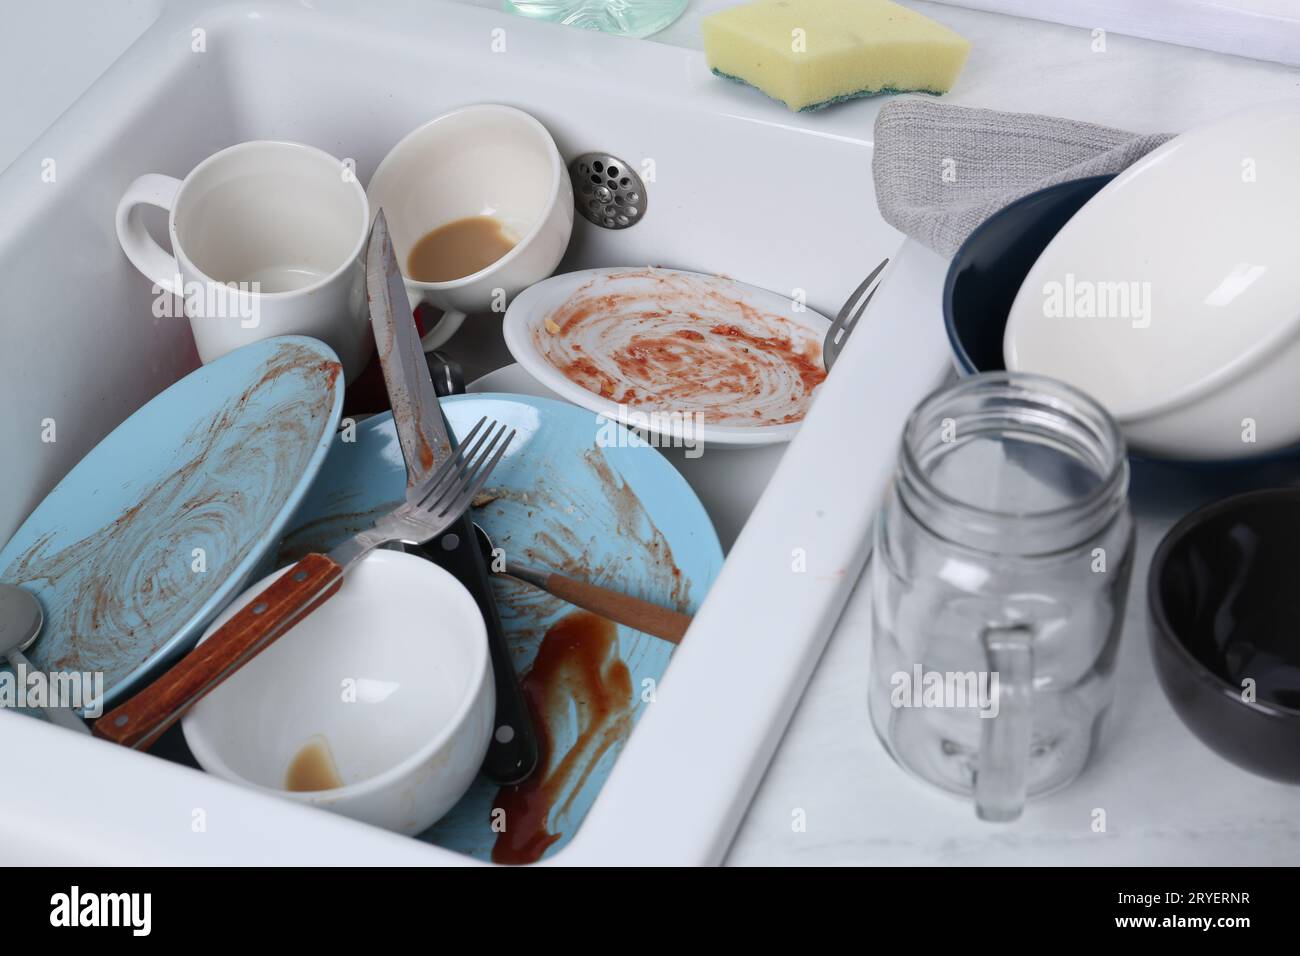 Sink with many dirty utensils and dishware in messy kitchen Stock Photo